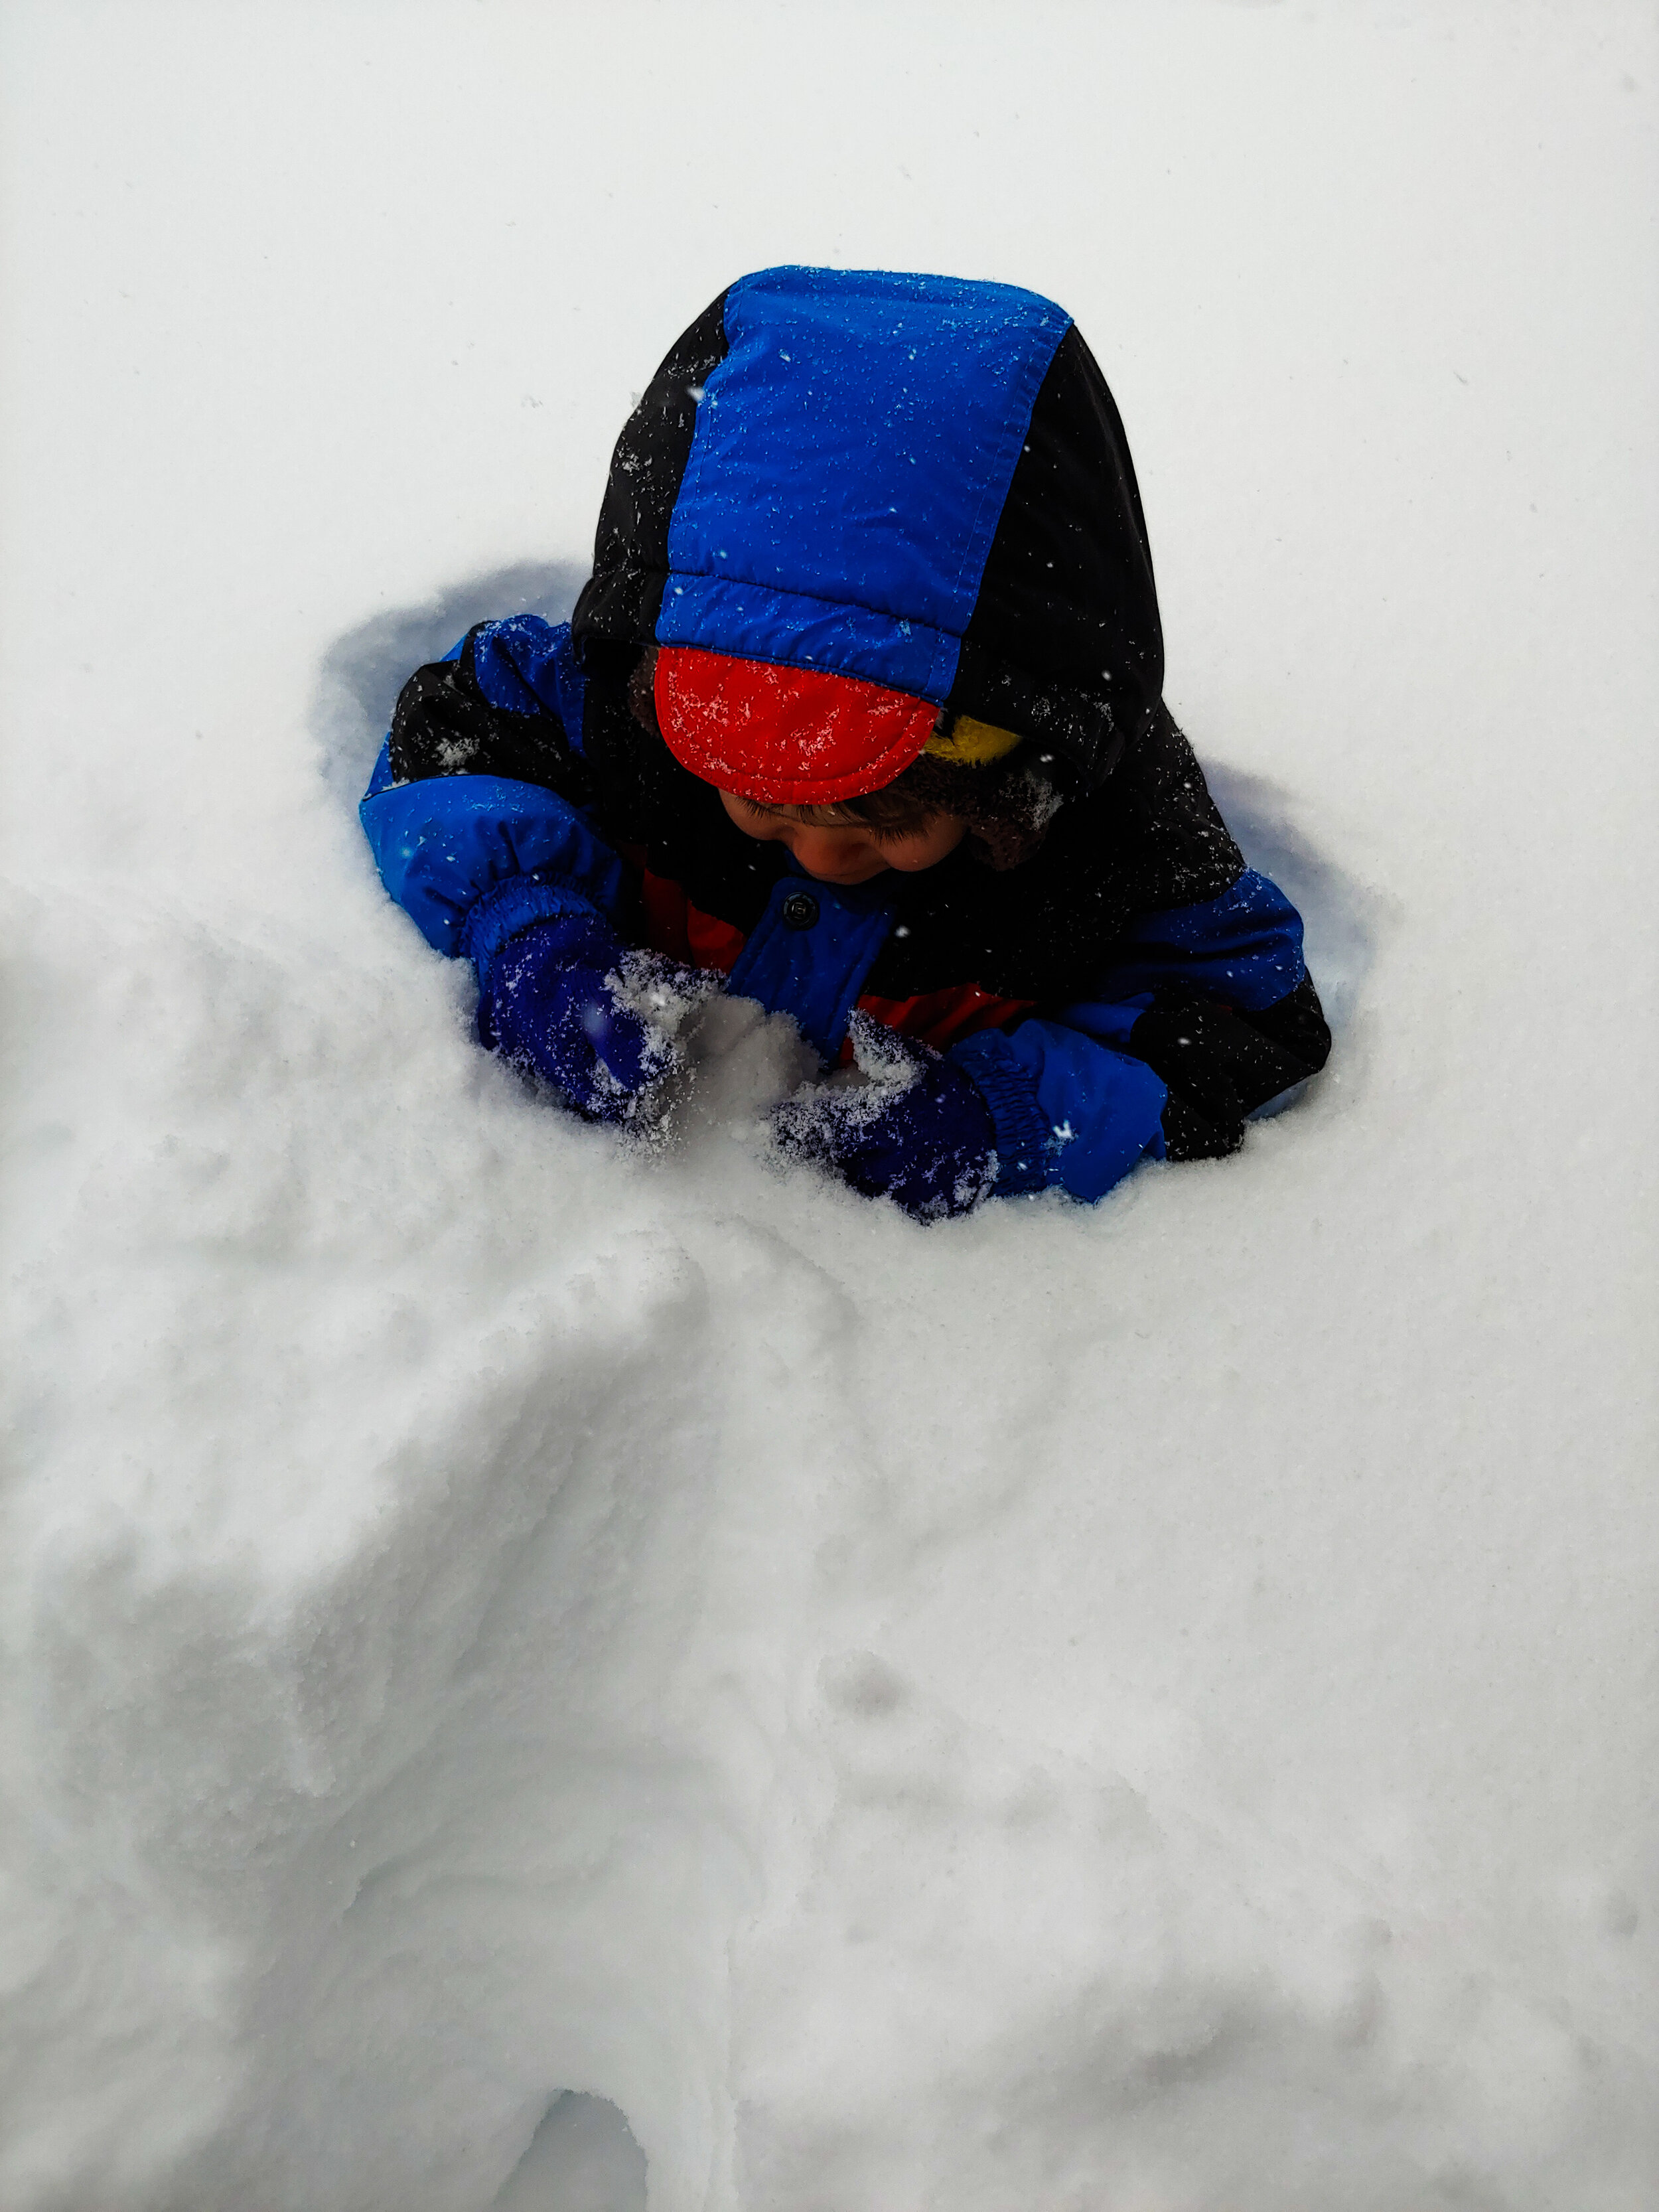 20" of snow is shoulder height for a toddler